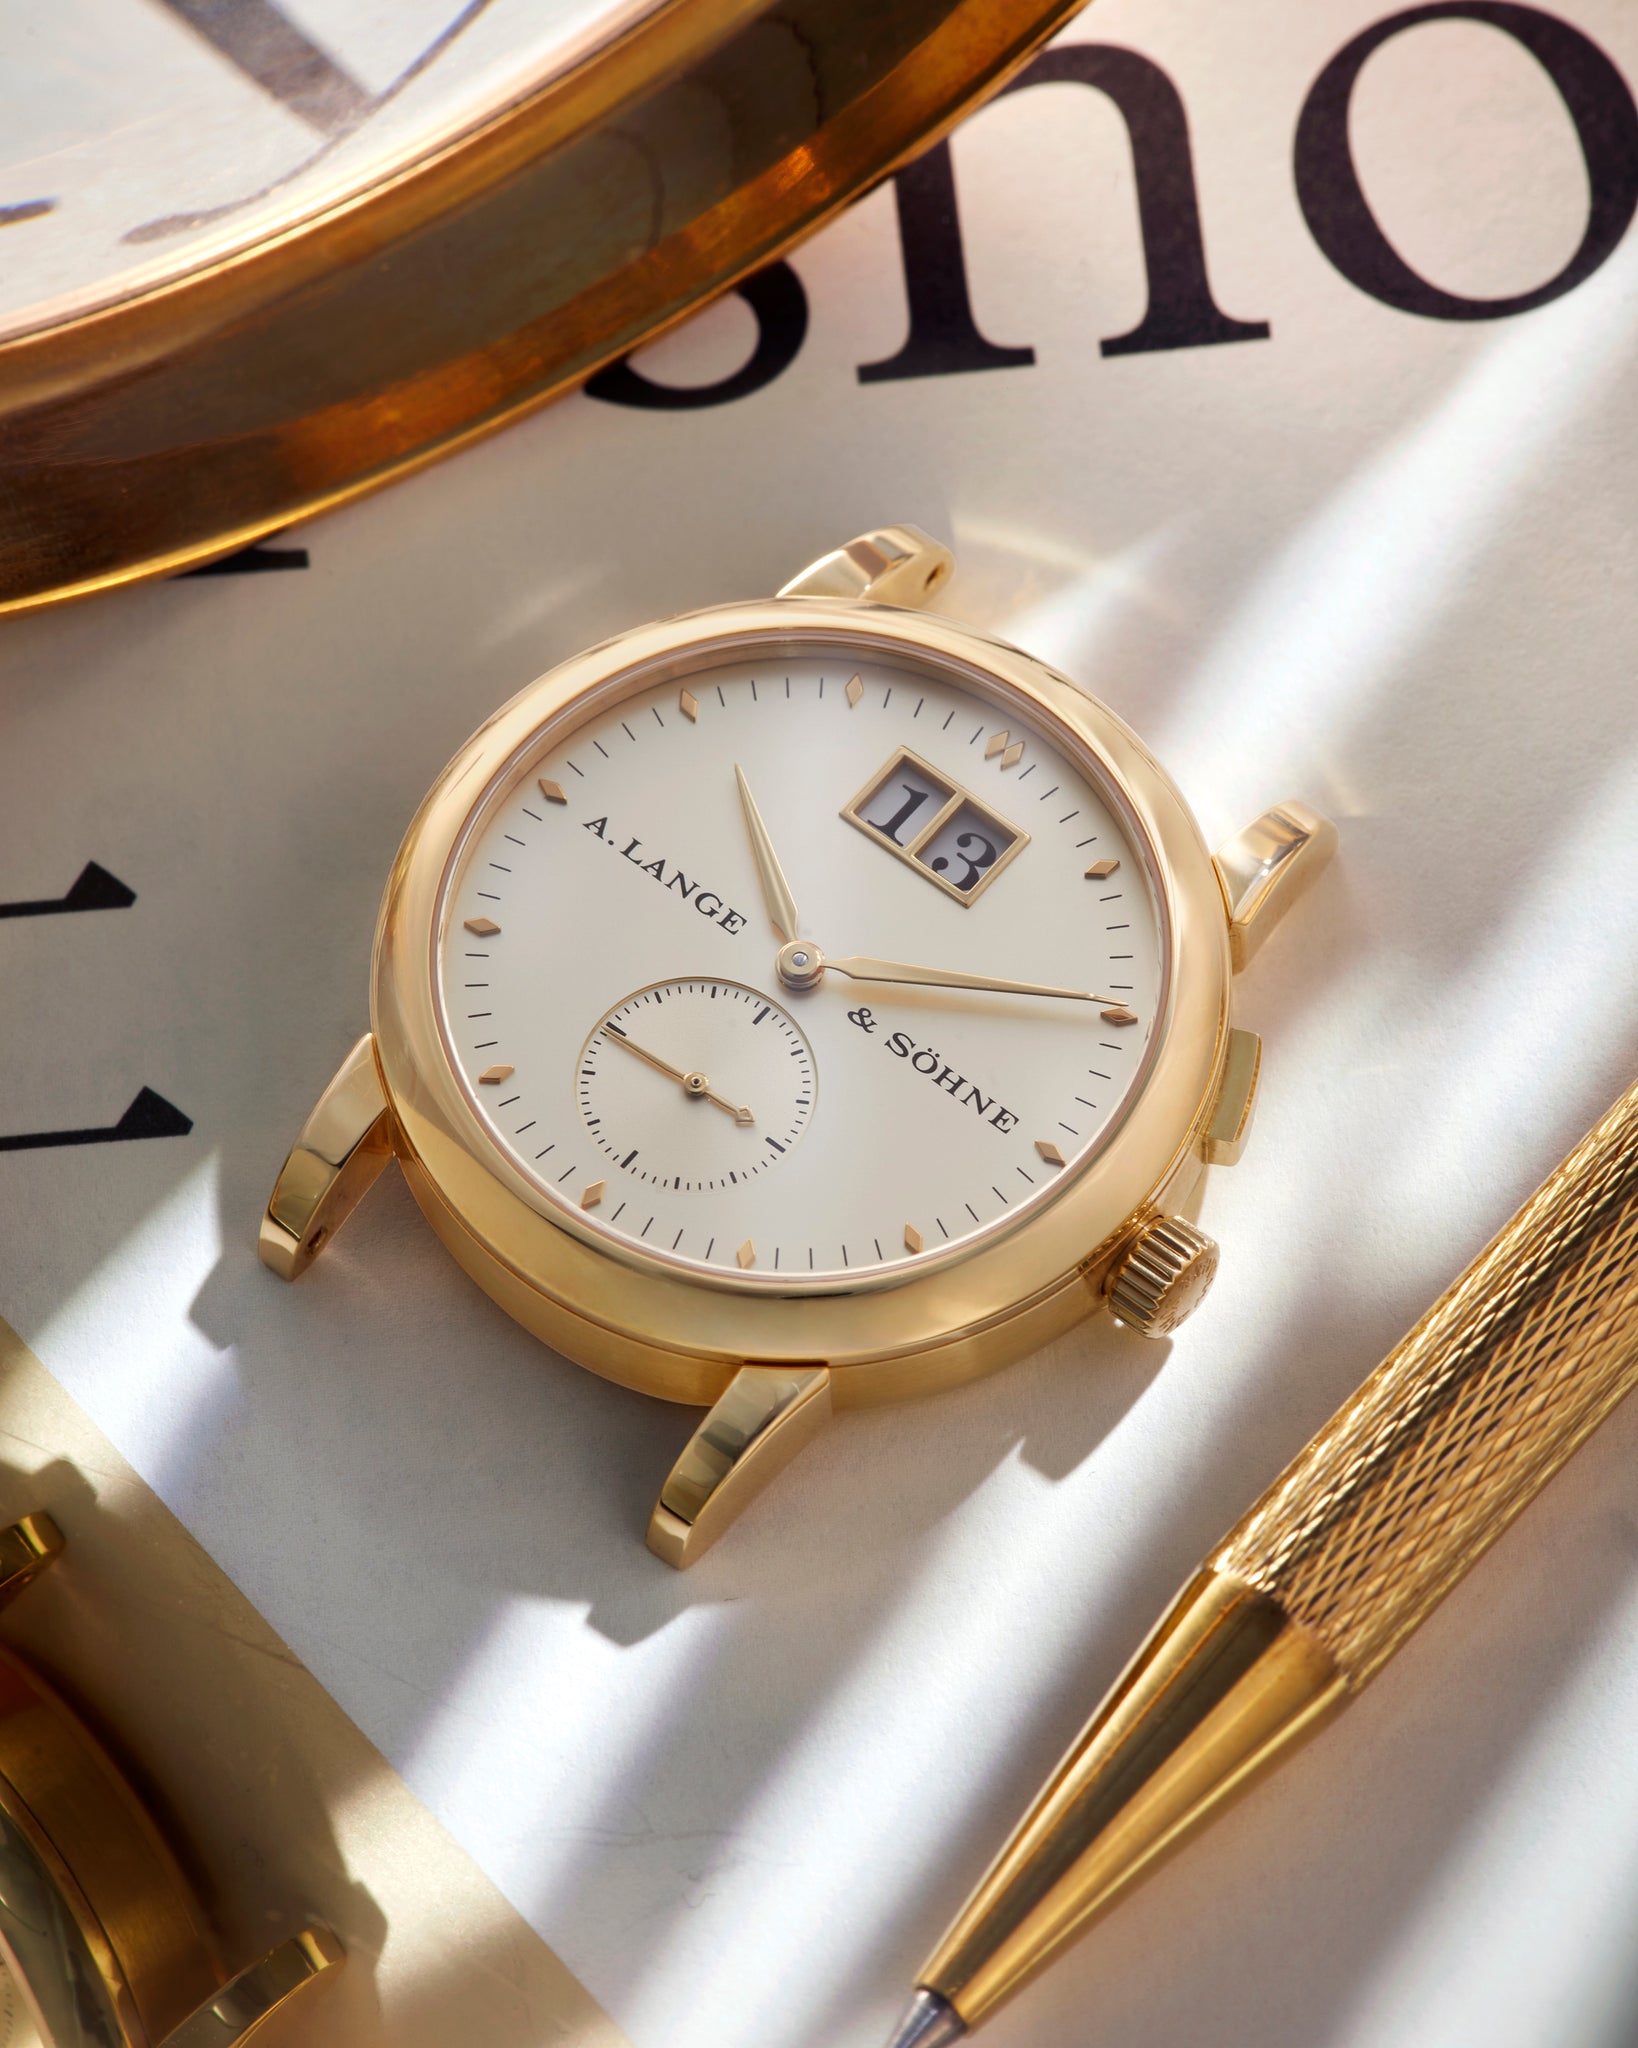 Front dial case | A. Lange & Söhne | Saxonia | 105.021 | Yellow Gold | Available worldwide at A Collected Man